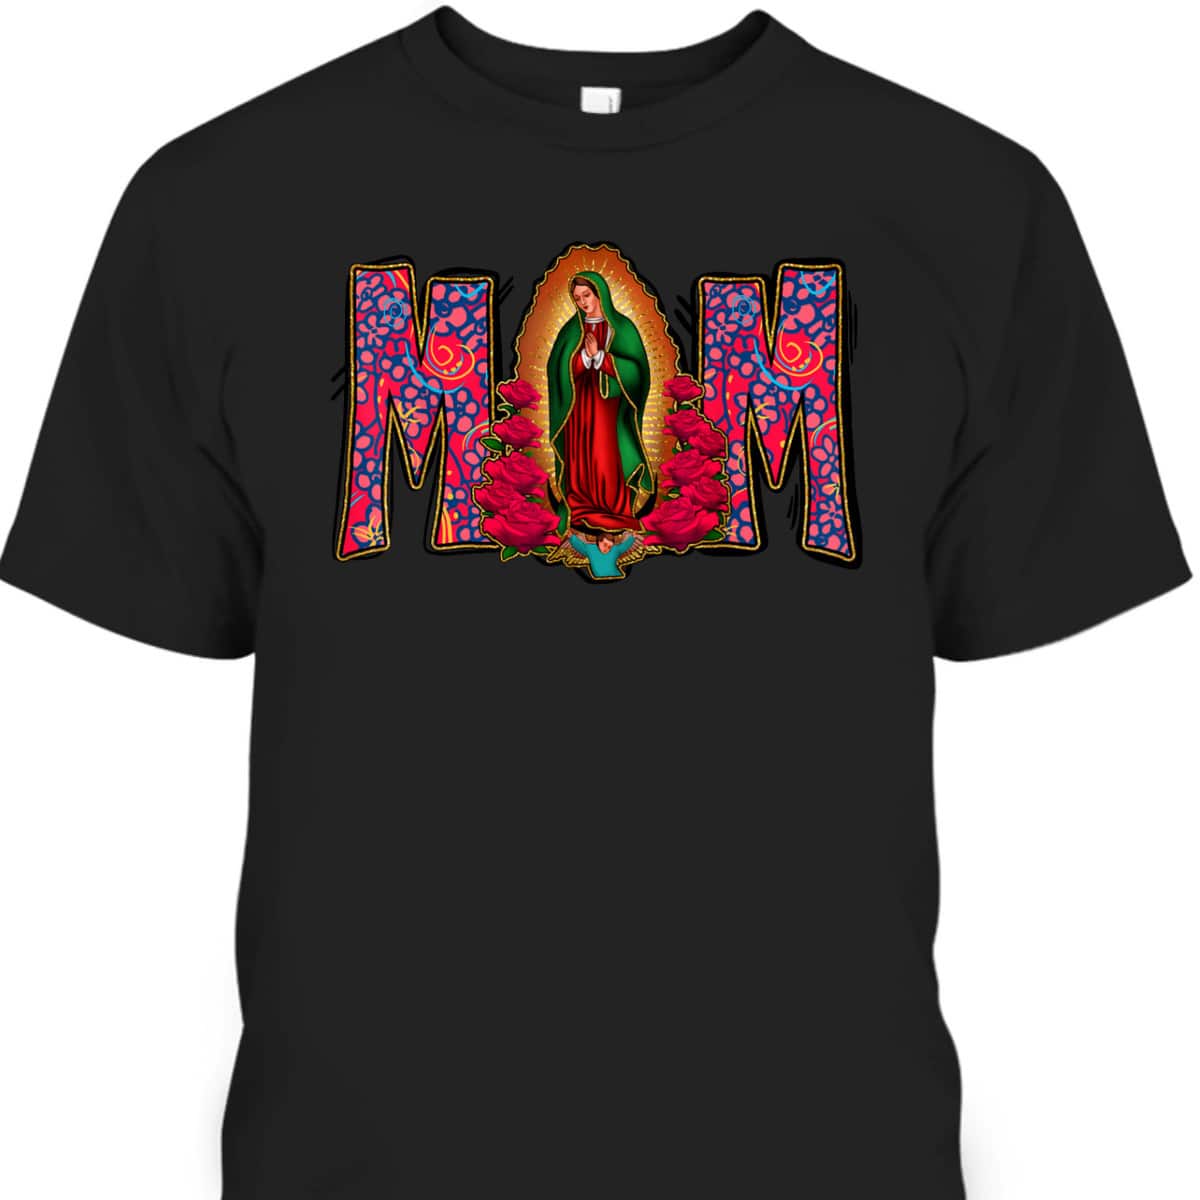 Our Lady Of Guadalupe Catholic Virgin Mary Mexican Mom T-Shirt